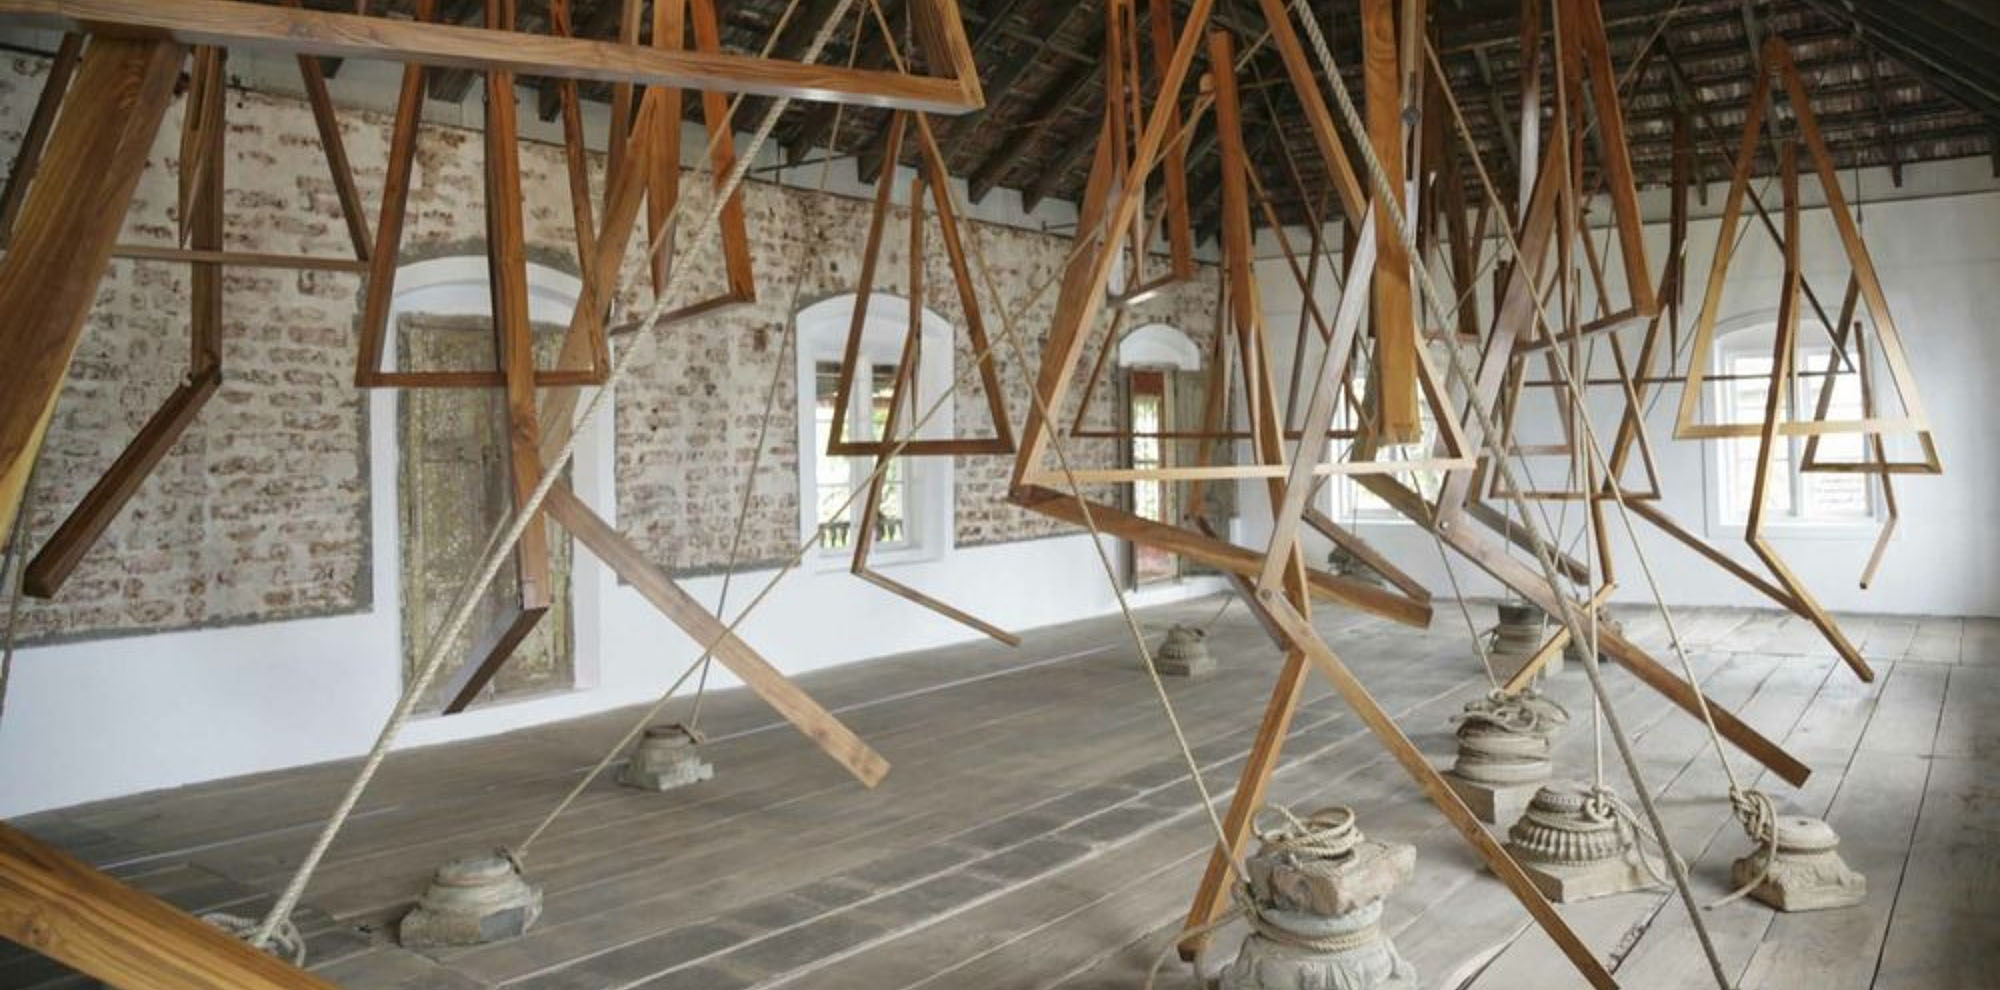 Several wooden structures tied to column bases using ropes are installed in a large exposed brick room.